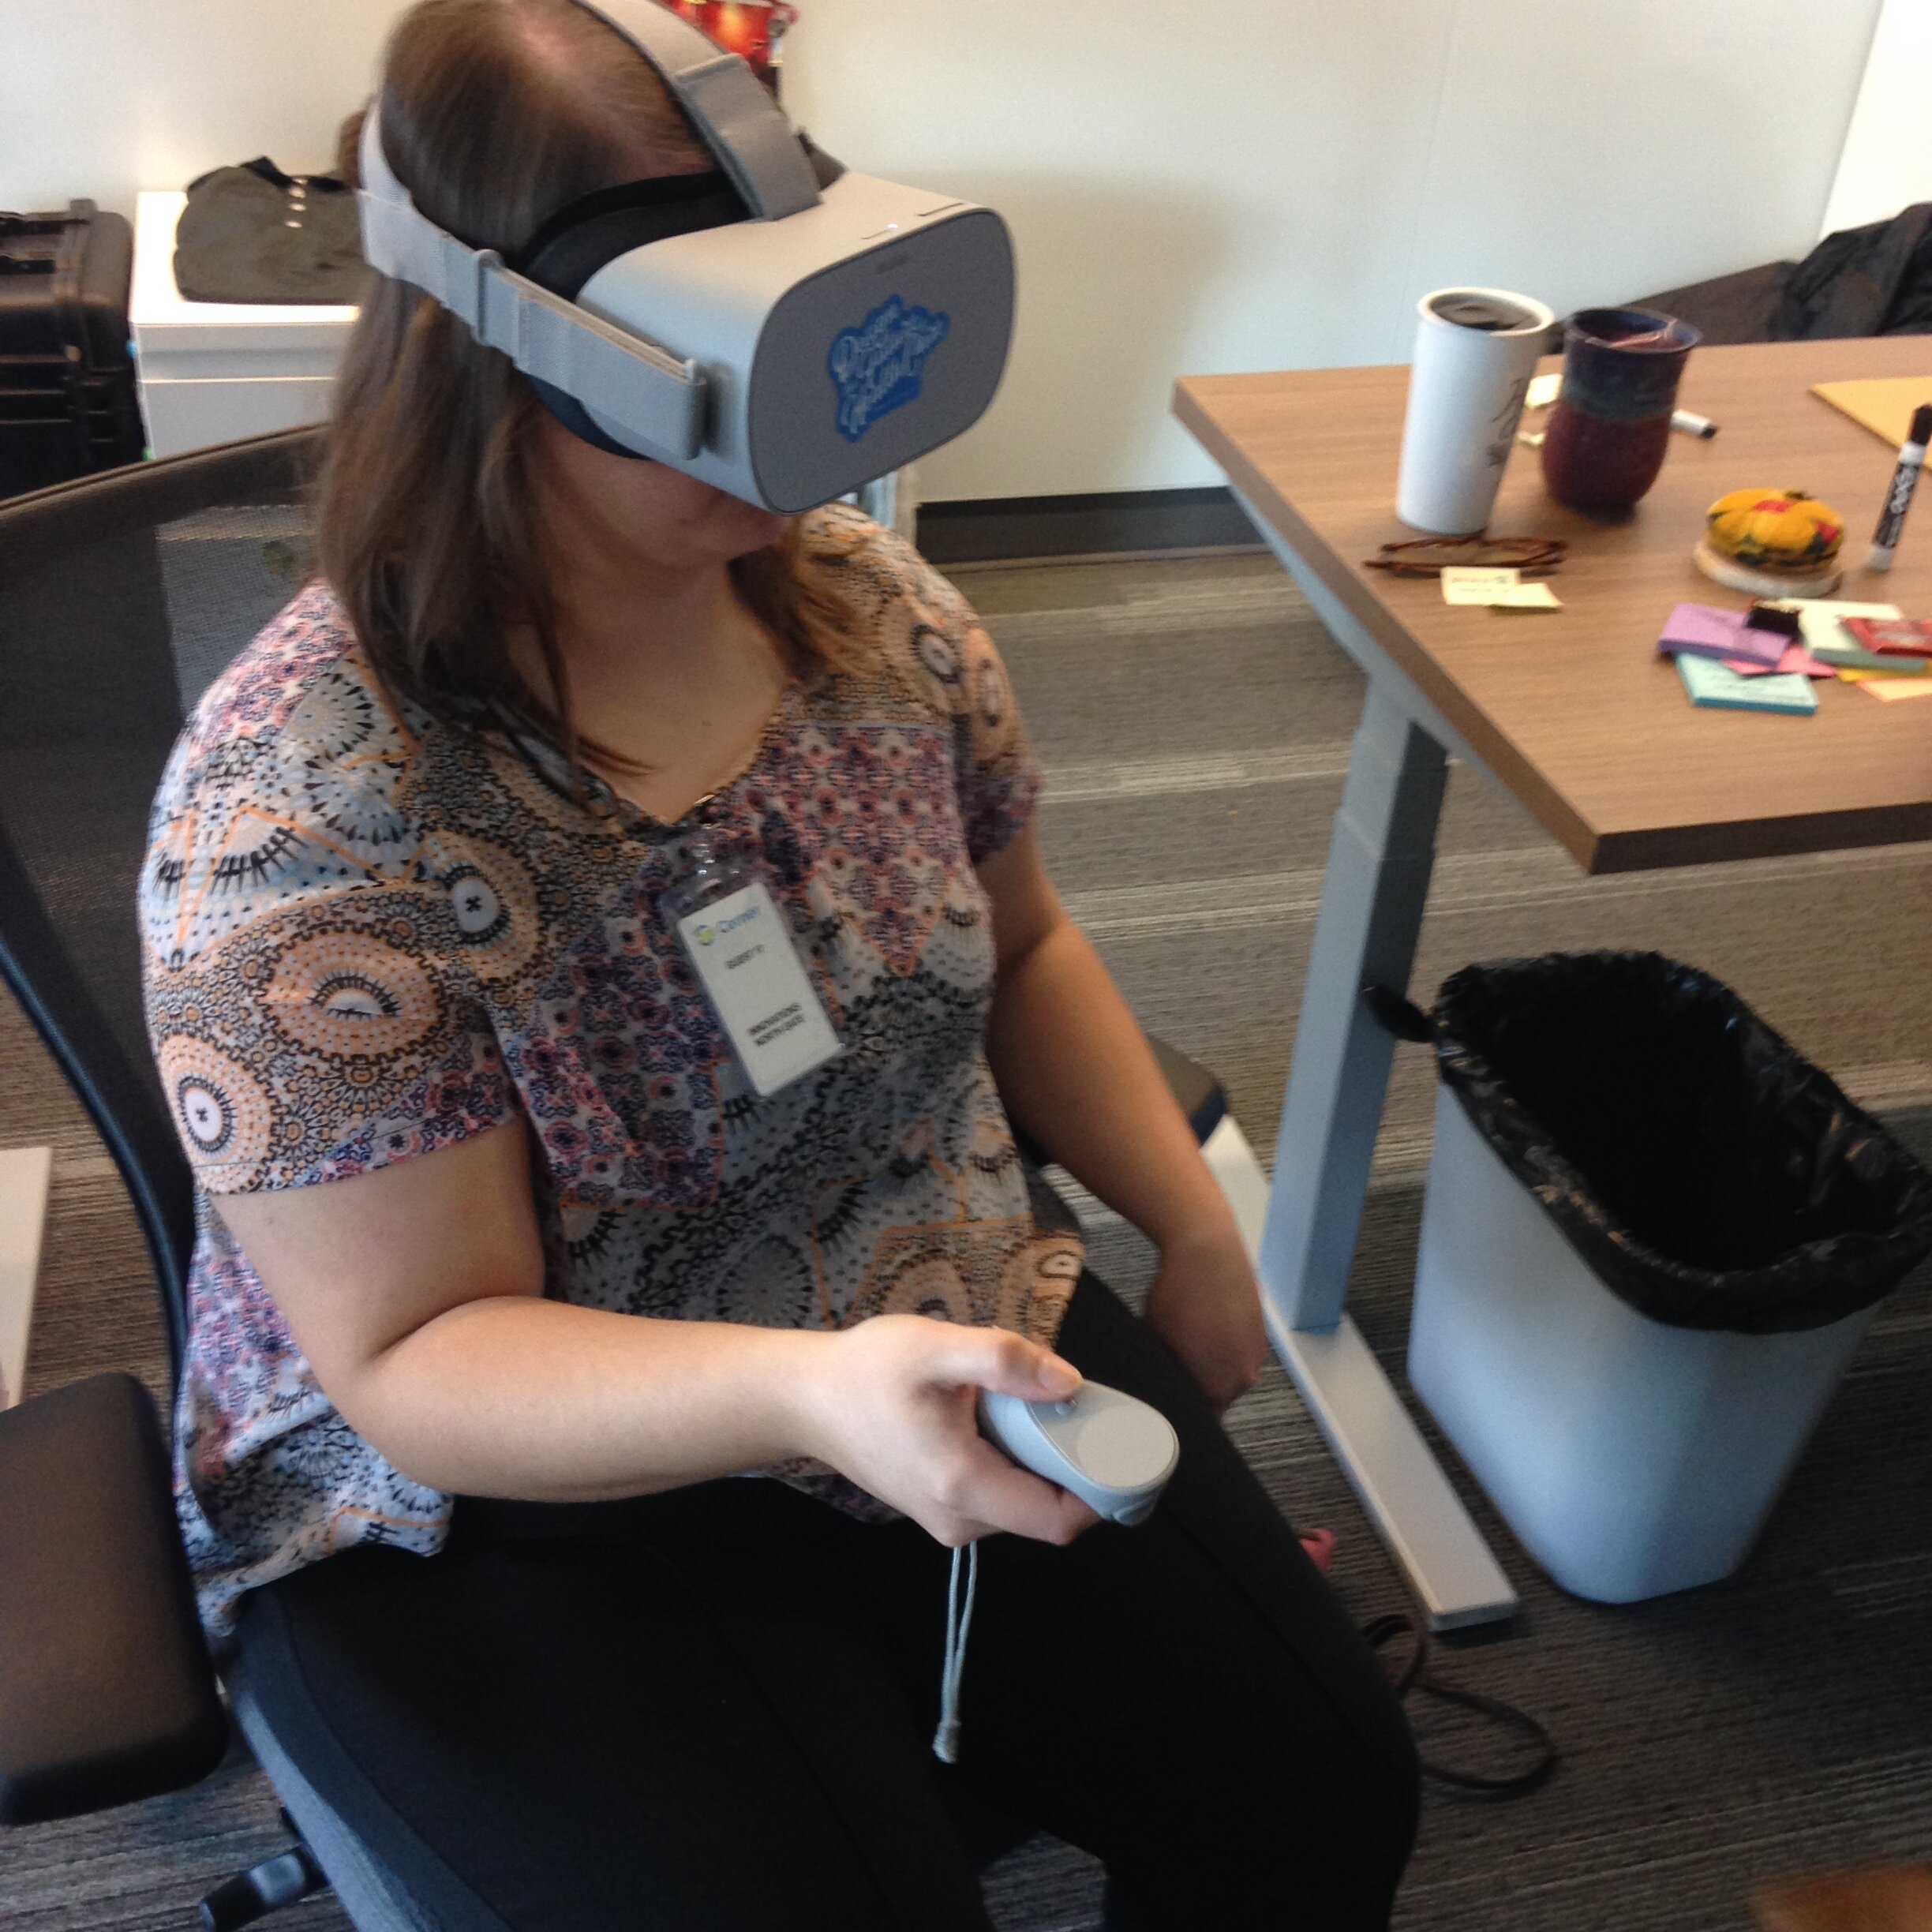 junior katie wynn tests out a virtual reality relaxation experience during a tour at the cerner kickoff event, fall 2019.